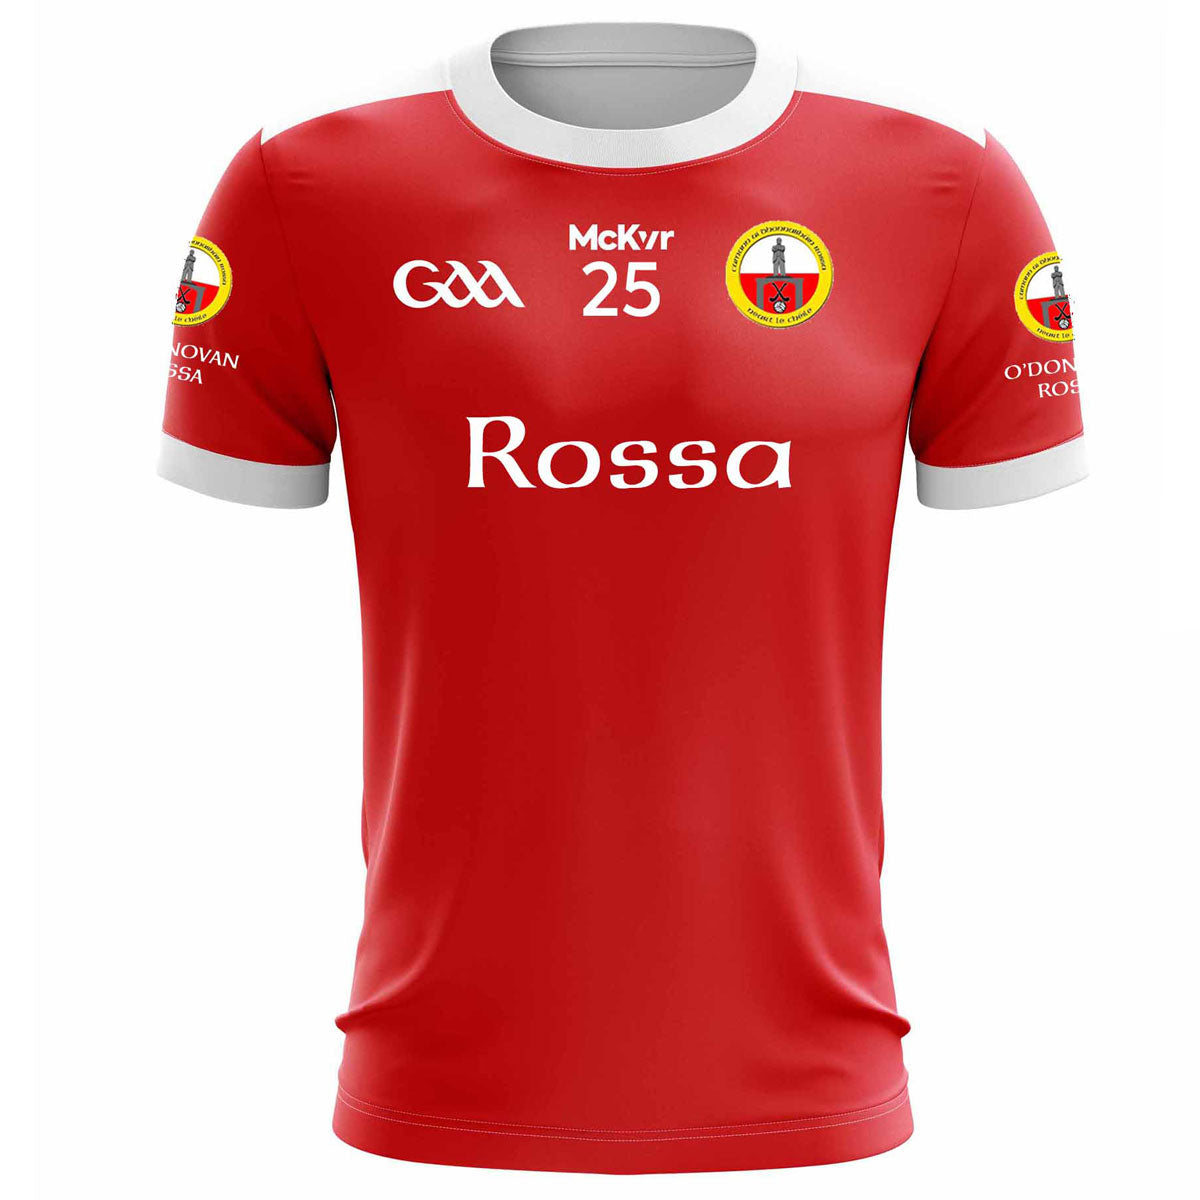 Mc Keever O'Donovan Rossa GAA Numbered Playing Jersey - Adult - Red/White Player Fit